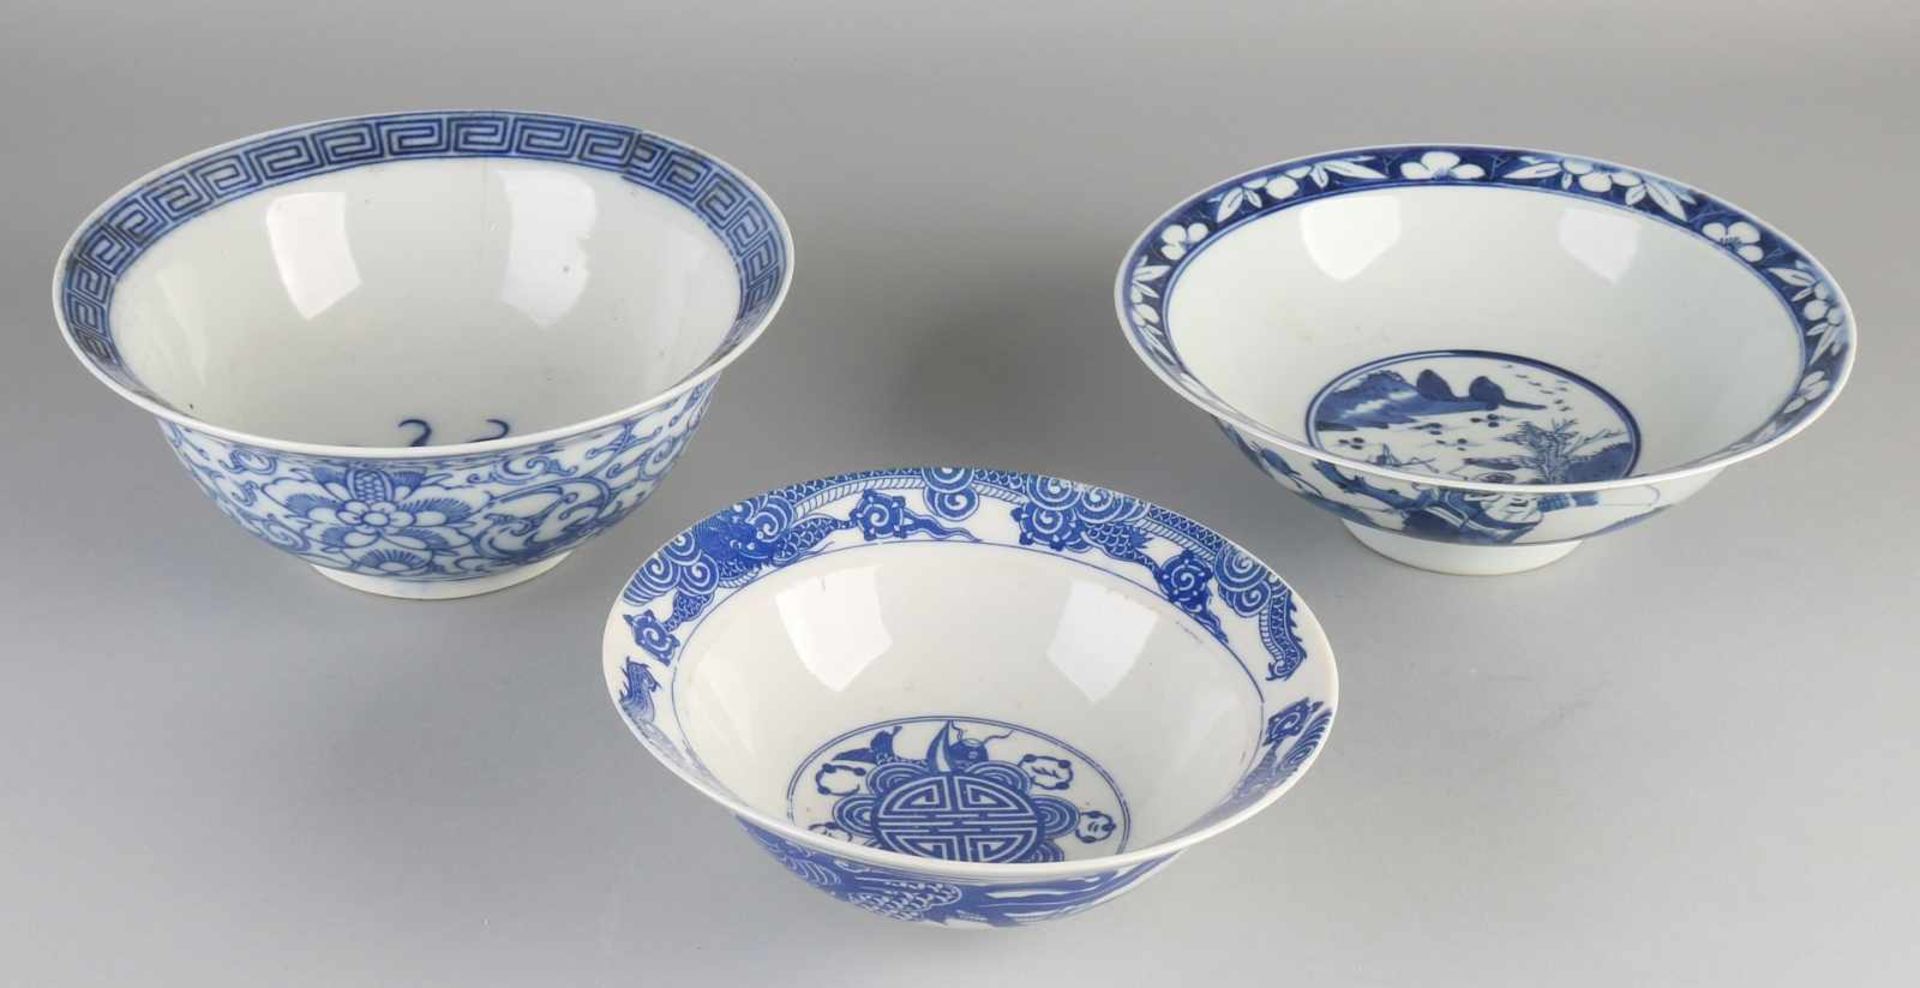 Three antique Chinese porcelain bowls. One time in paradise + bottom mark, circa 1900, good. One